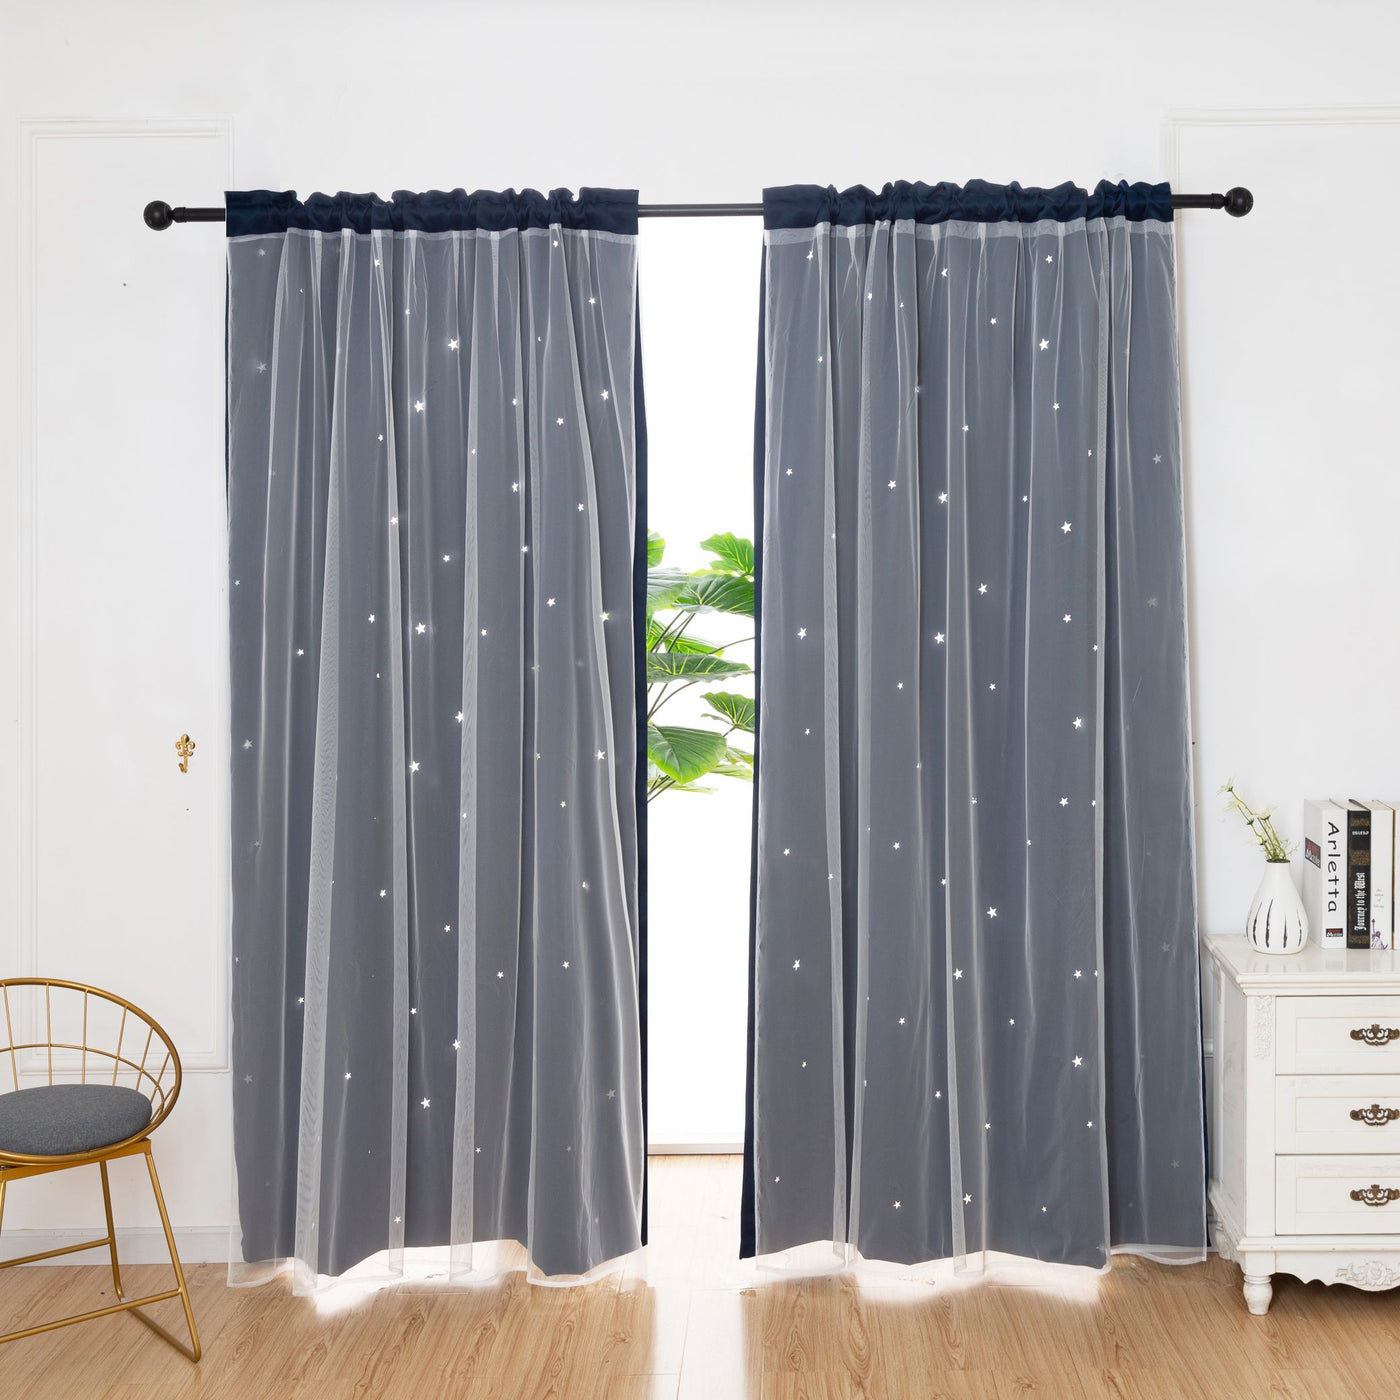 Stars Blackout Curtains Kids Bedroom Double Layer Star Cut Out Solid Window Curtains Rod Pocket | Jenin Home Furnishing.